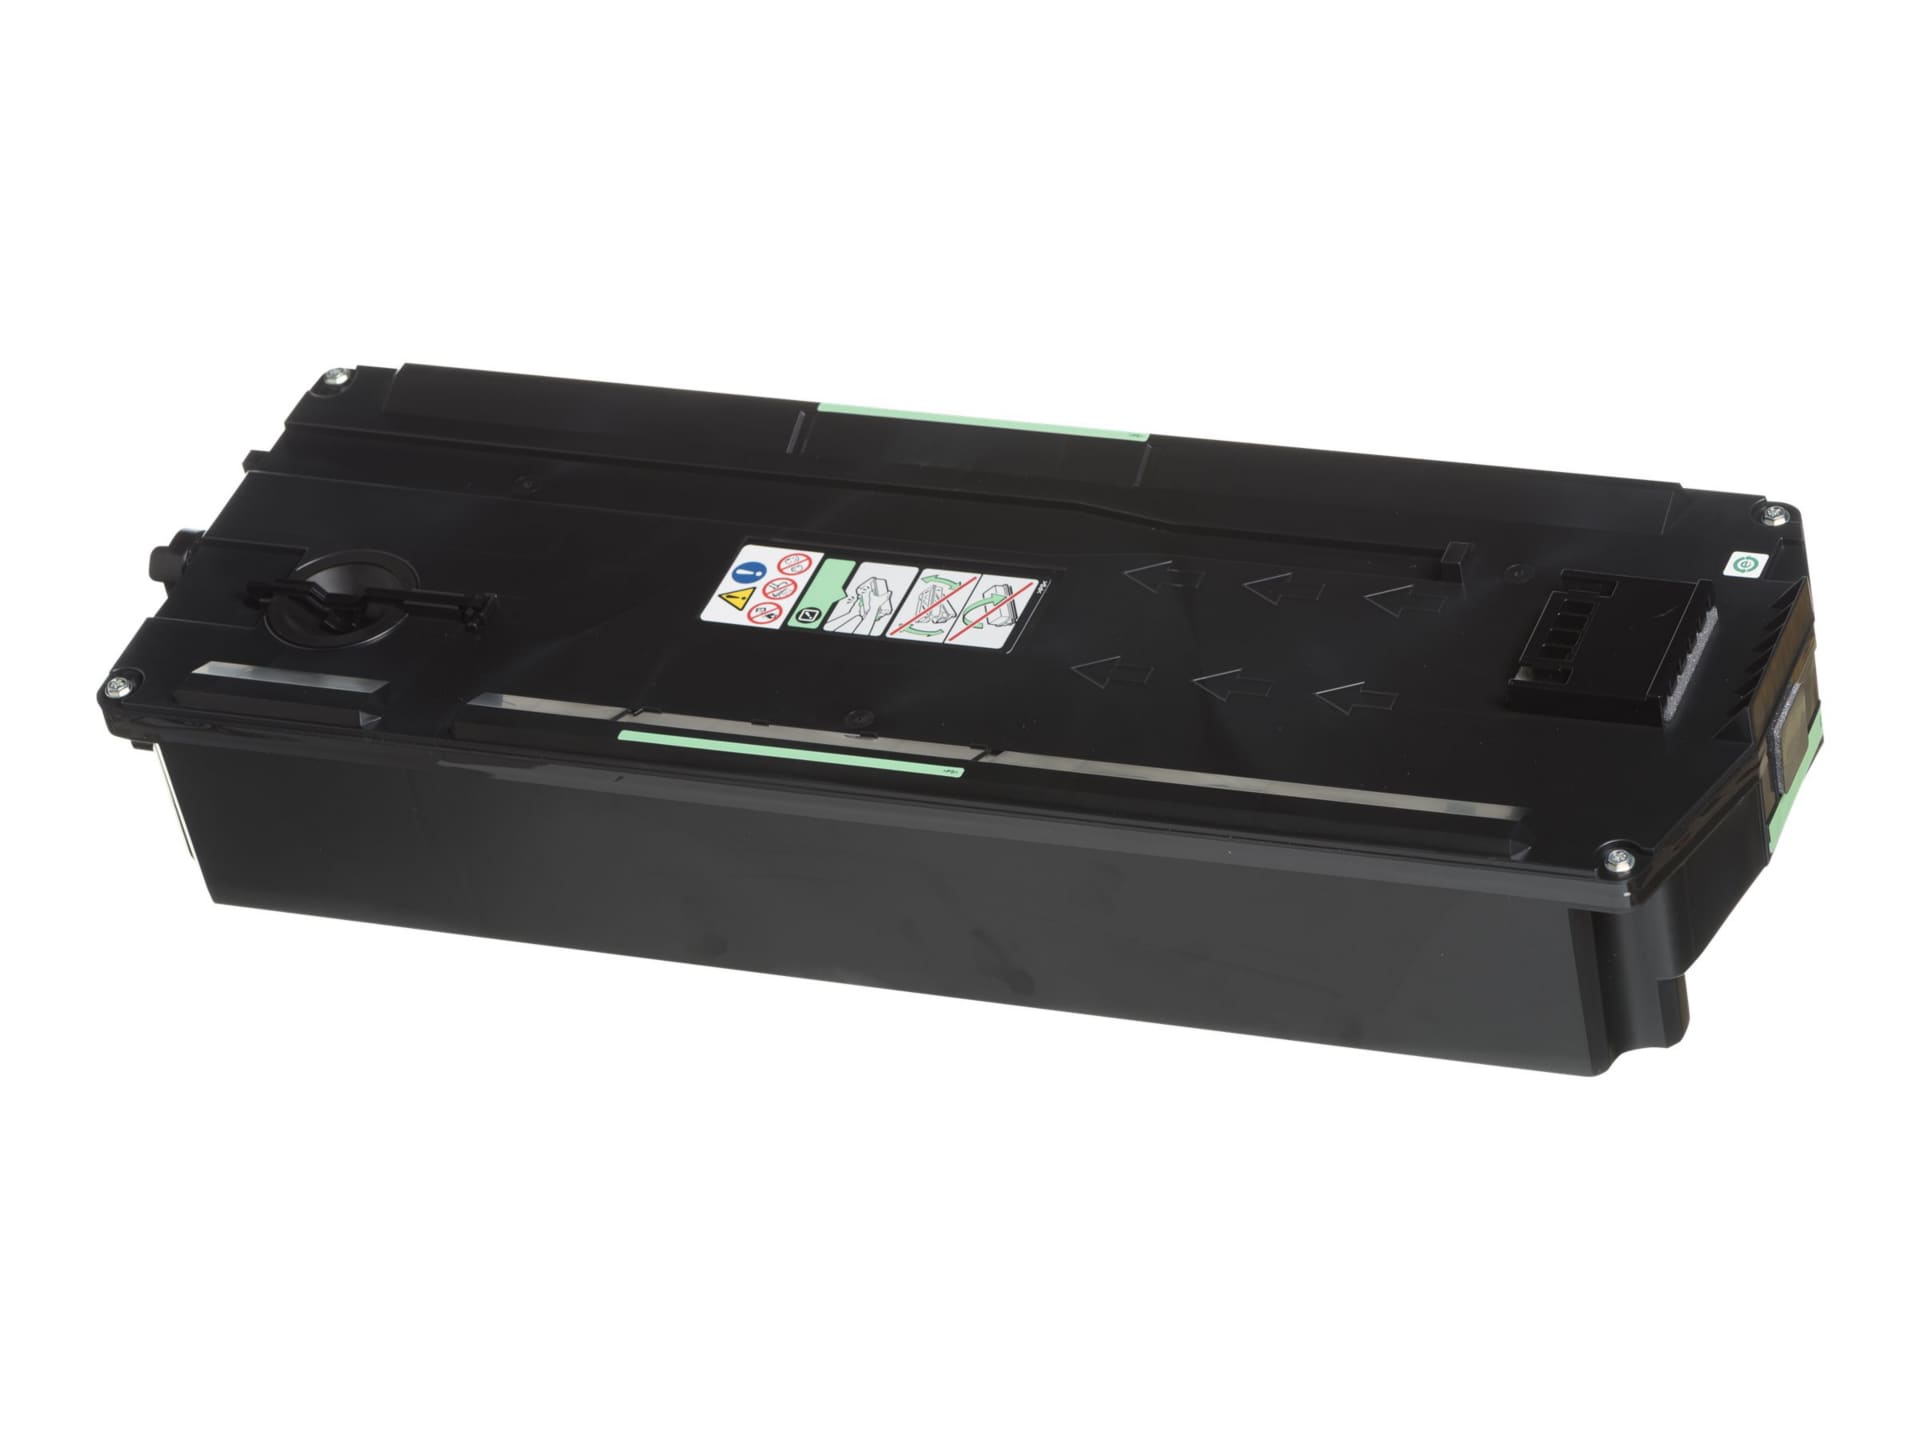 Ricoh MP C6003 - waste toner collector